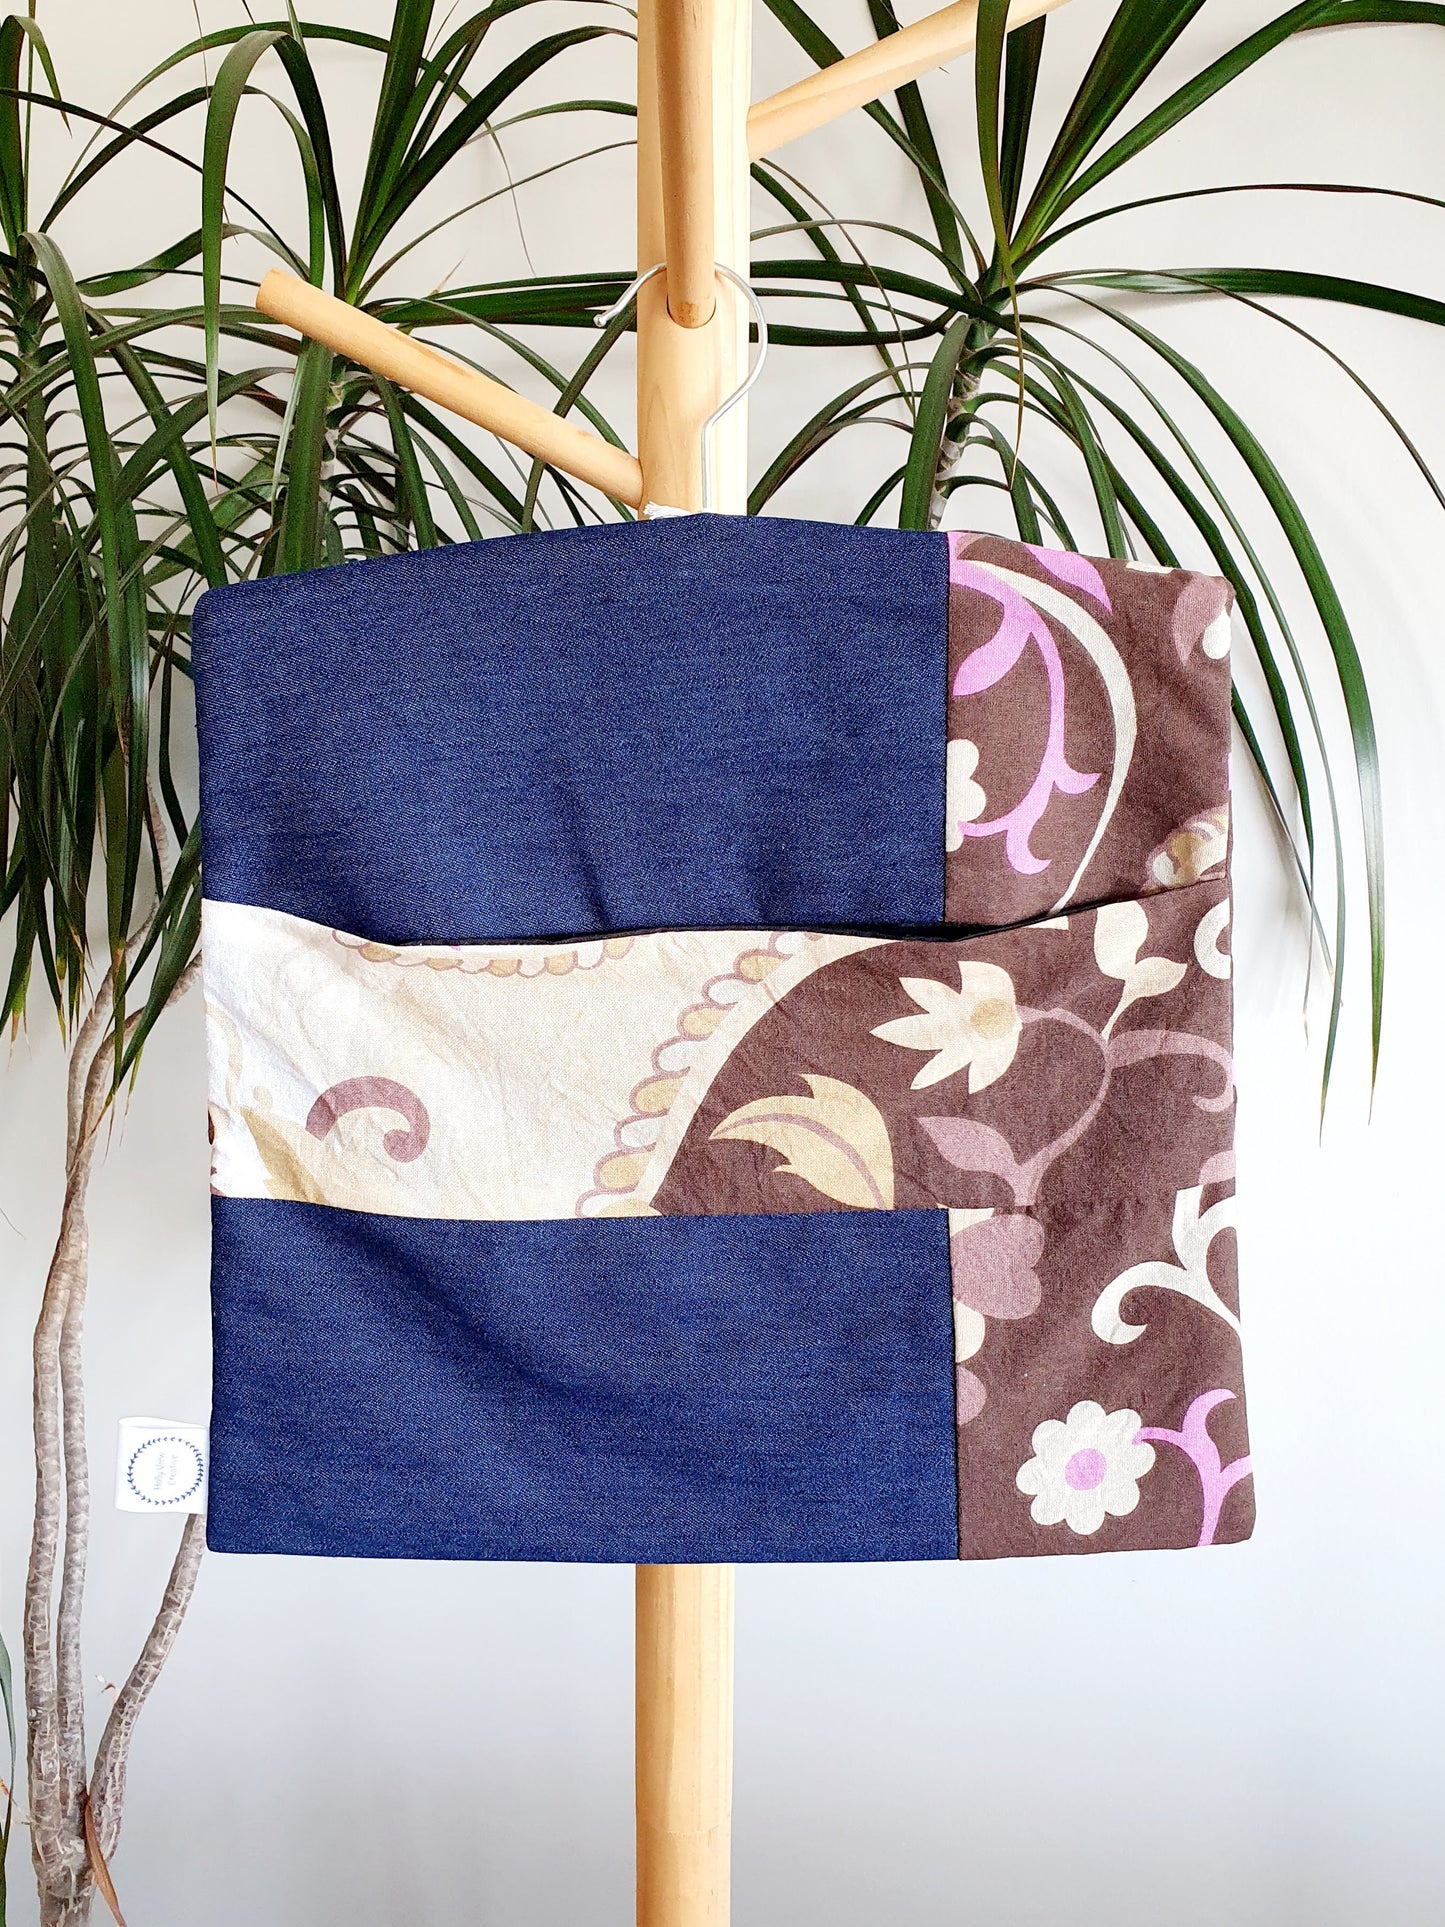 Upcycled Peg Bag with Removable Wooden Hanger